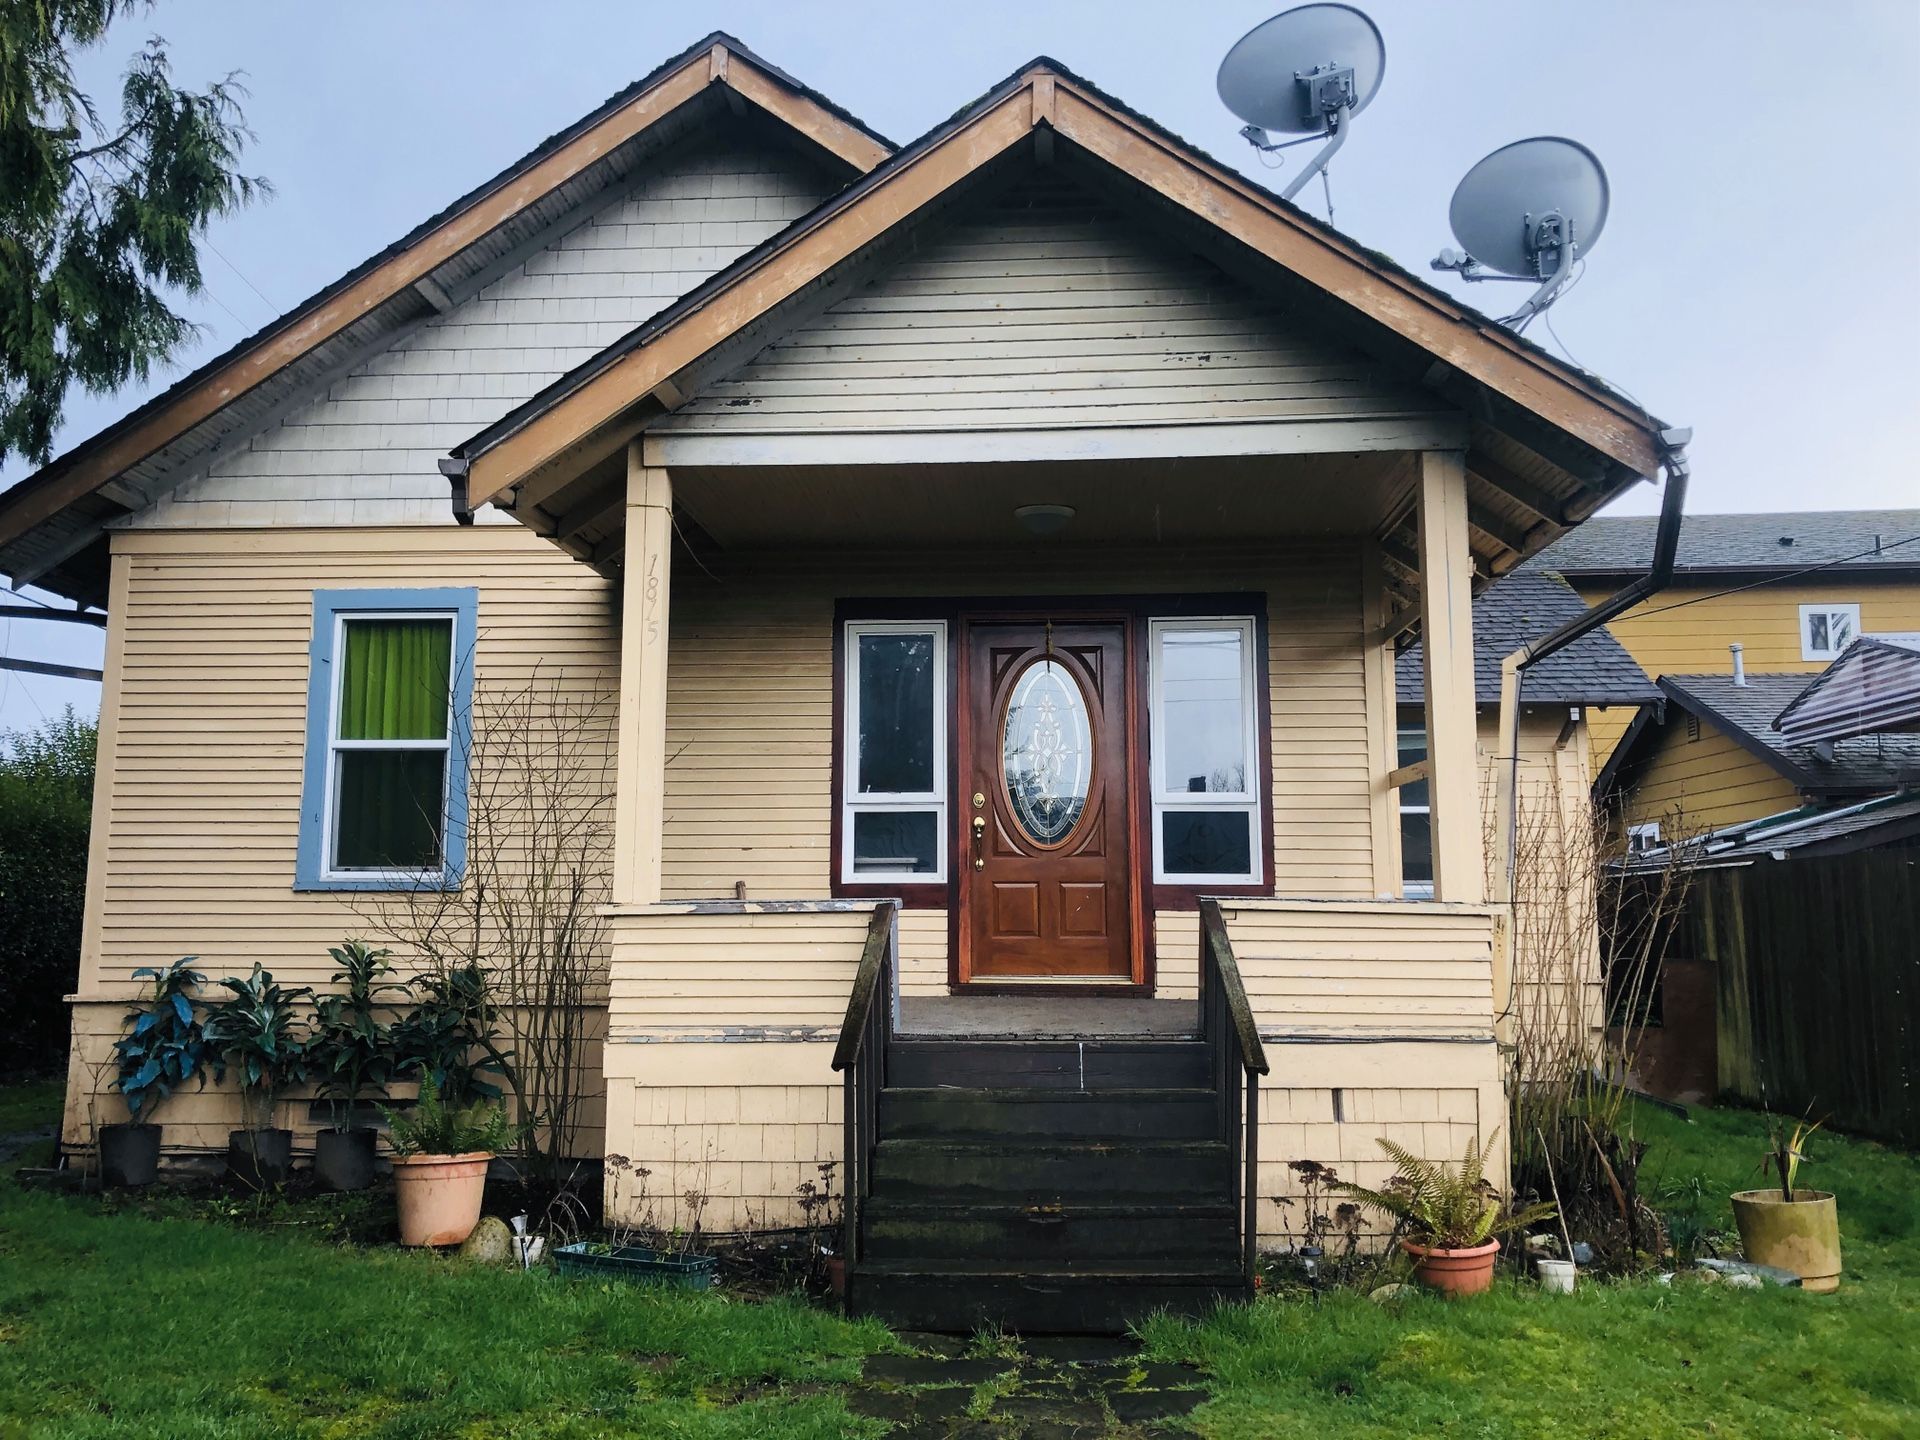 3 Bed 3 Bath 2090 sq ft Home in Seattle, White Center!